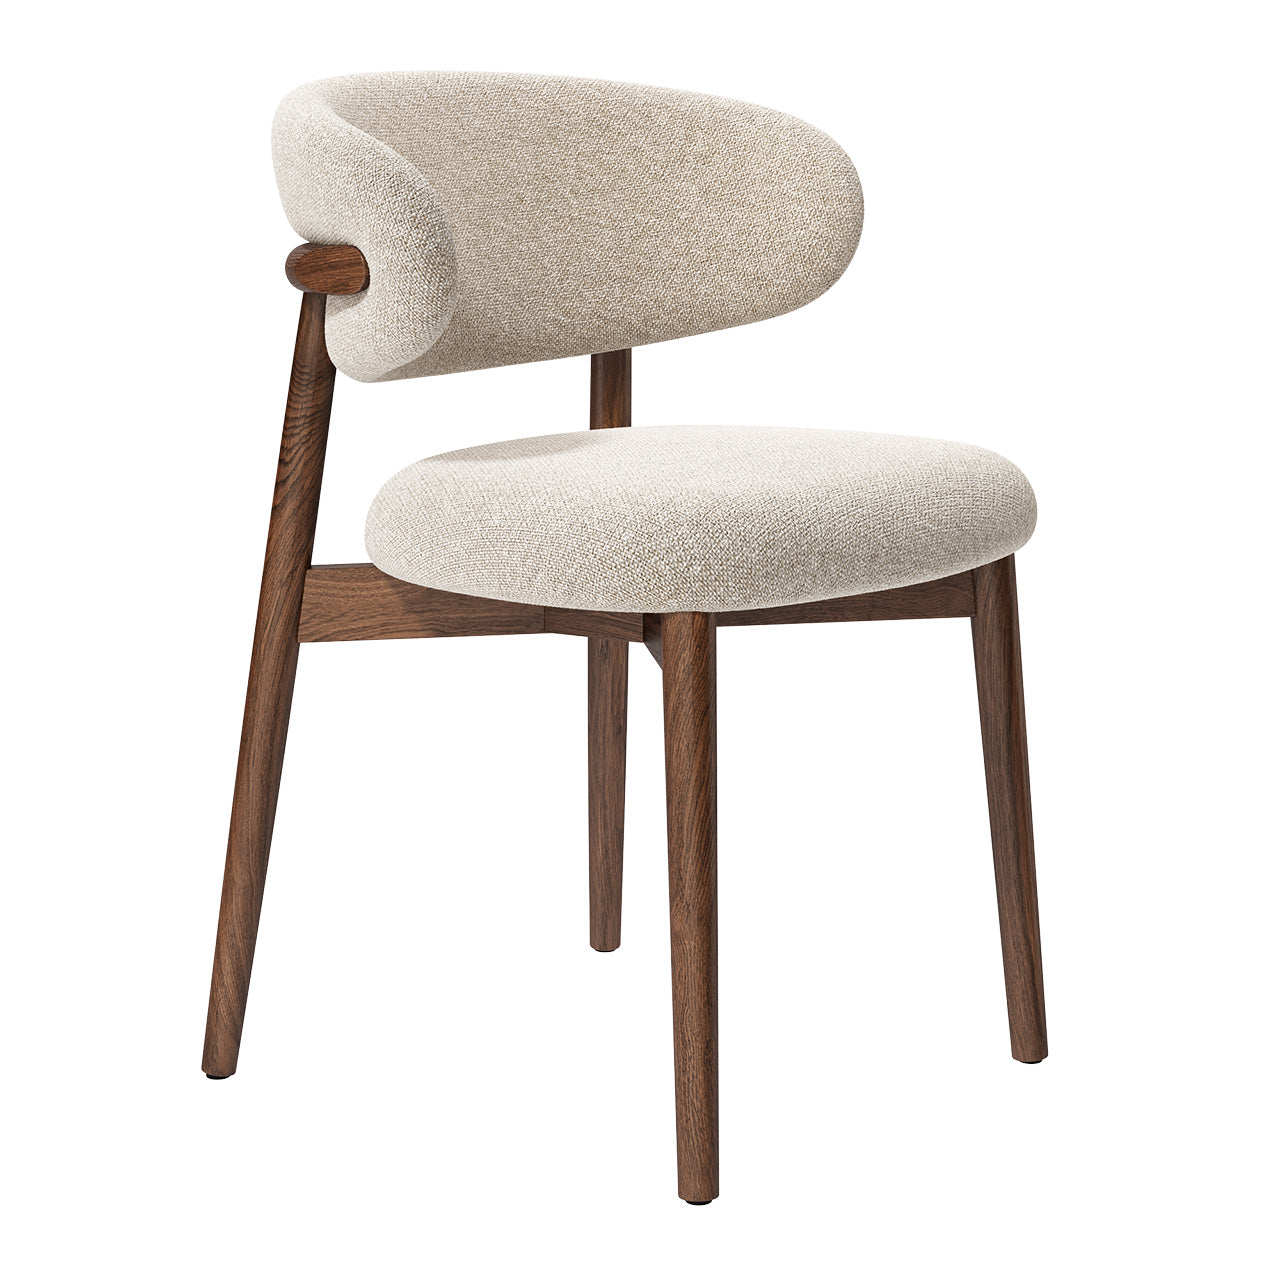 OLEANDRO WOODEN CHAIR